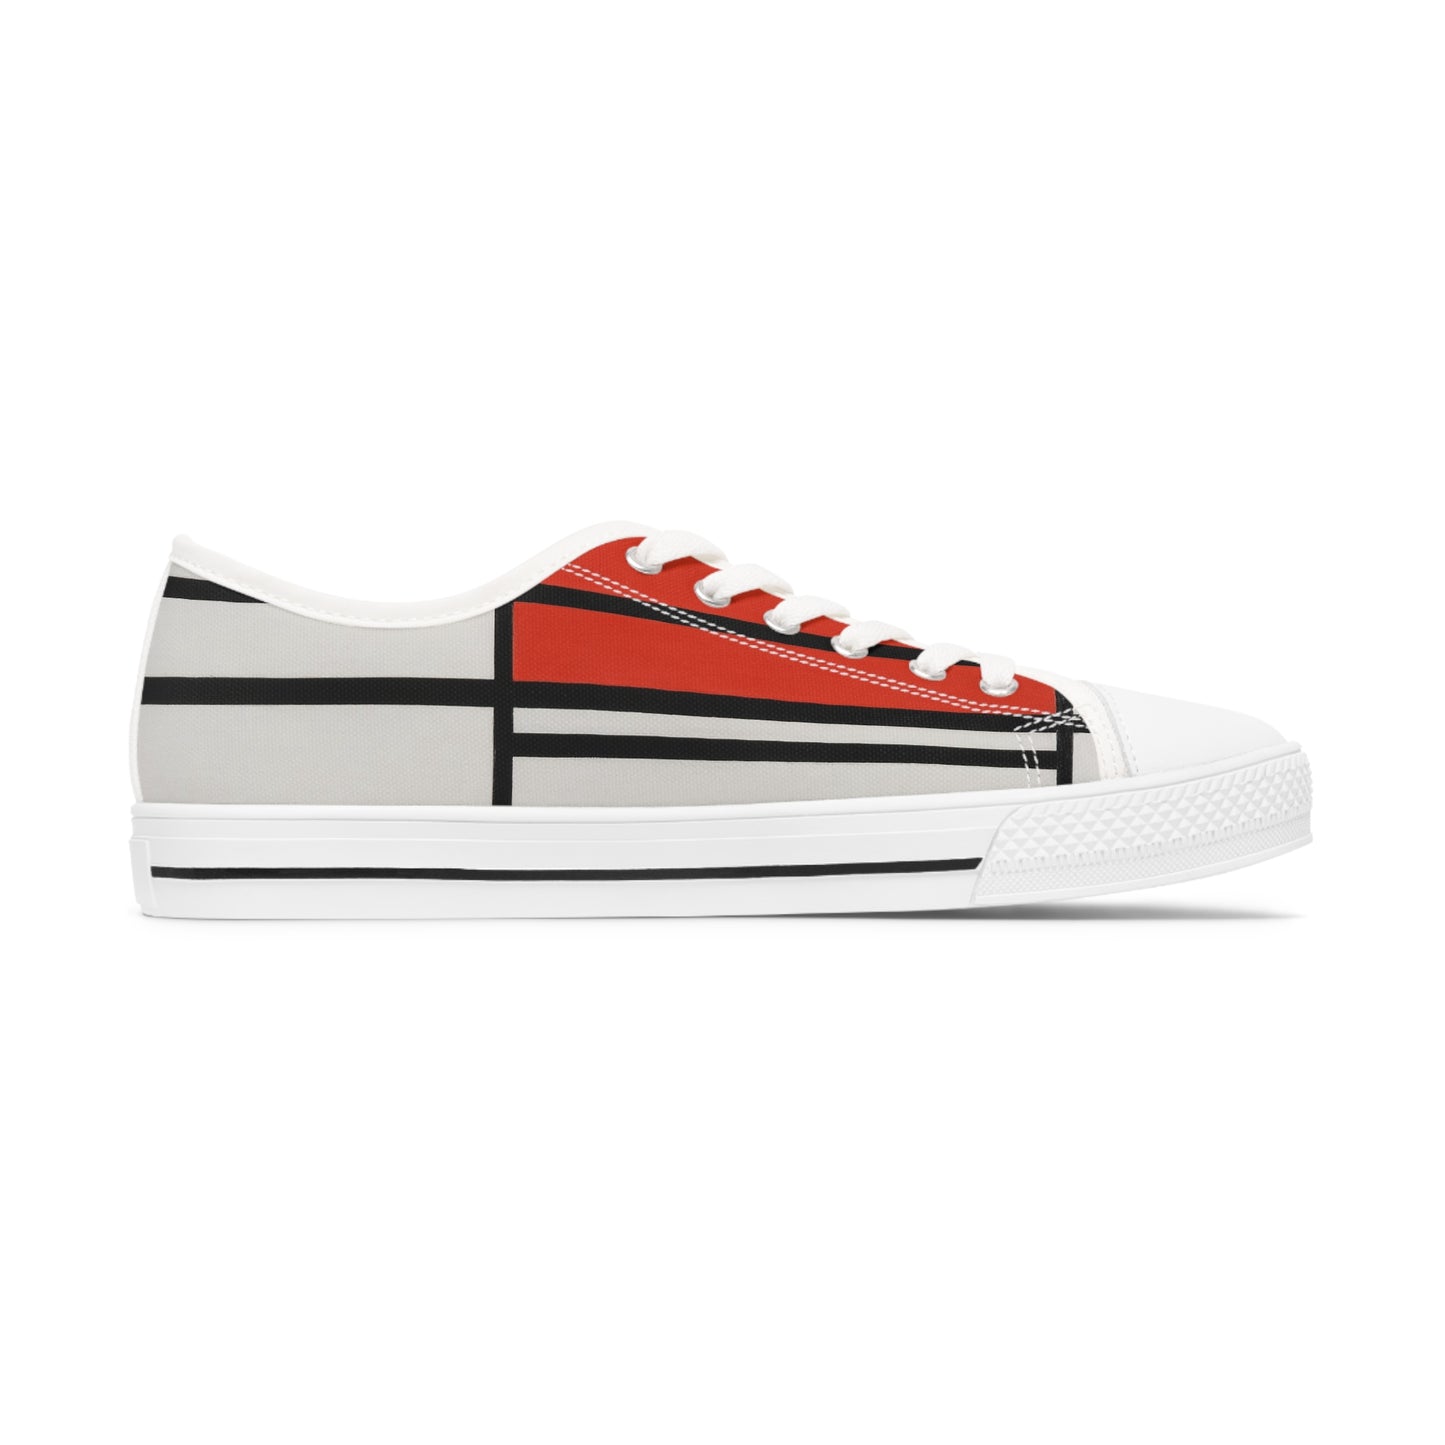 PIET MONDRIAN - COMPOSITION OF RED AND WHITE - LOW TOP ART SNEAKERS FOR HER